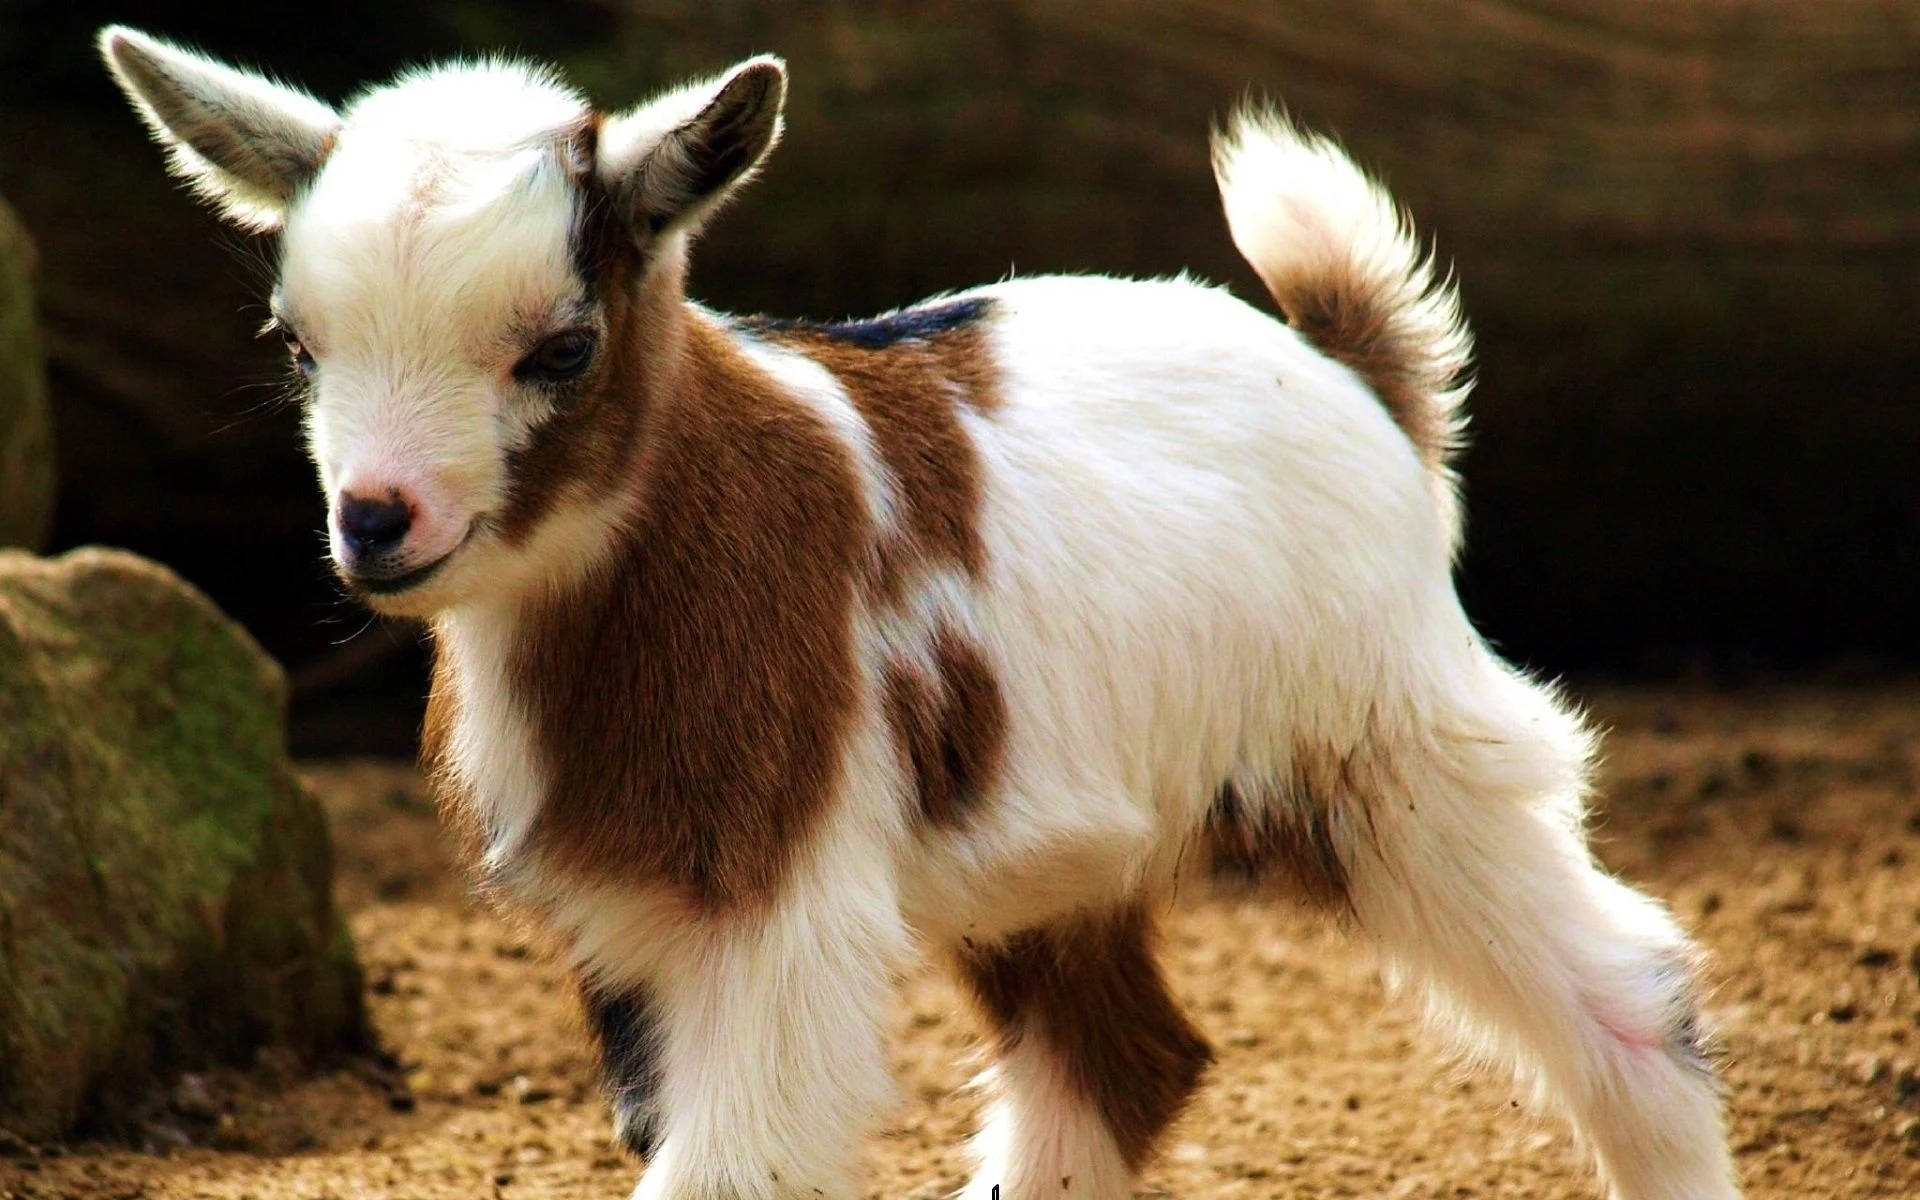 "Adorable Baby Goat Exploring the Nature" Wallpaper